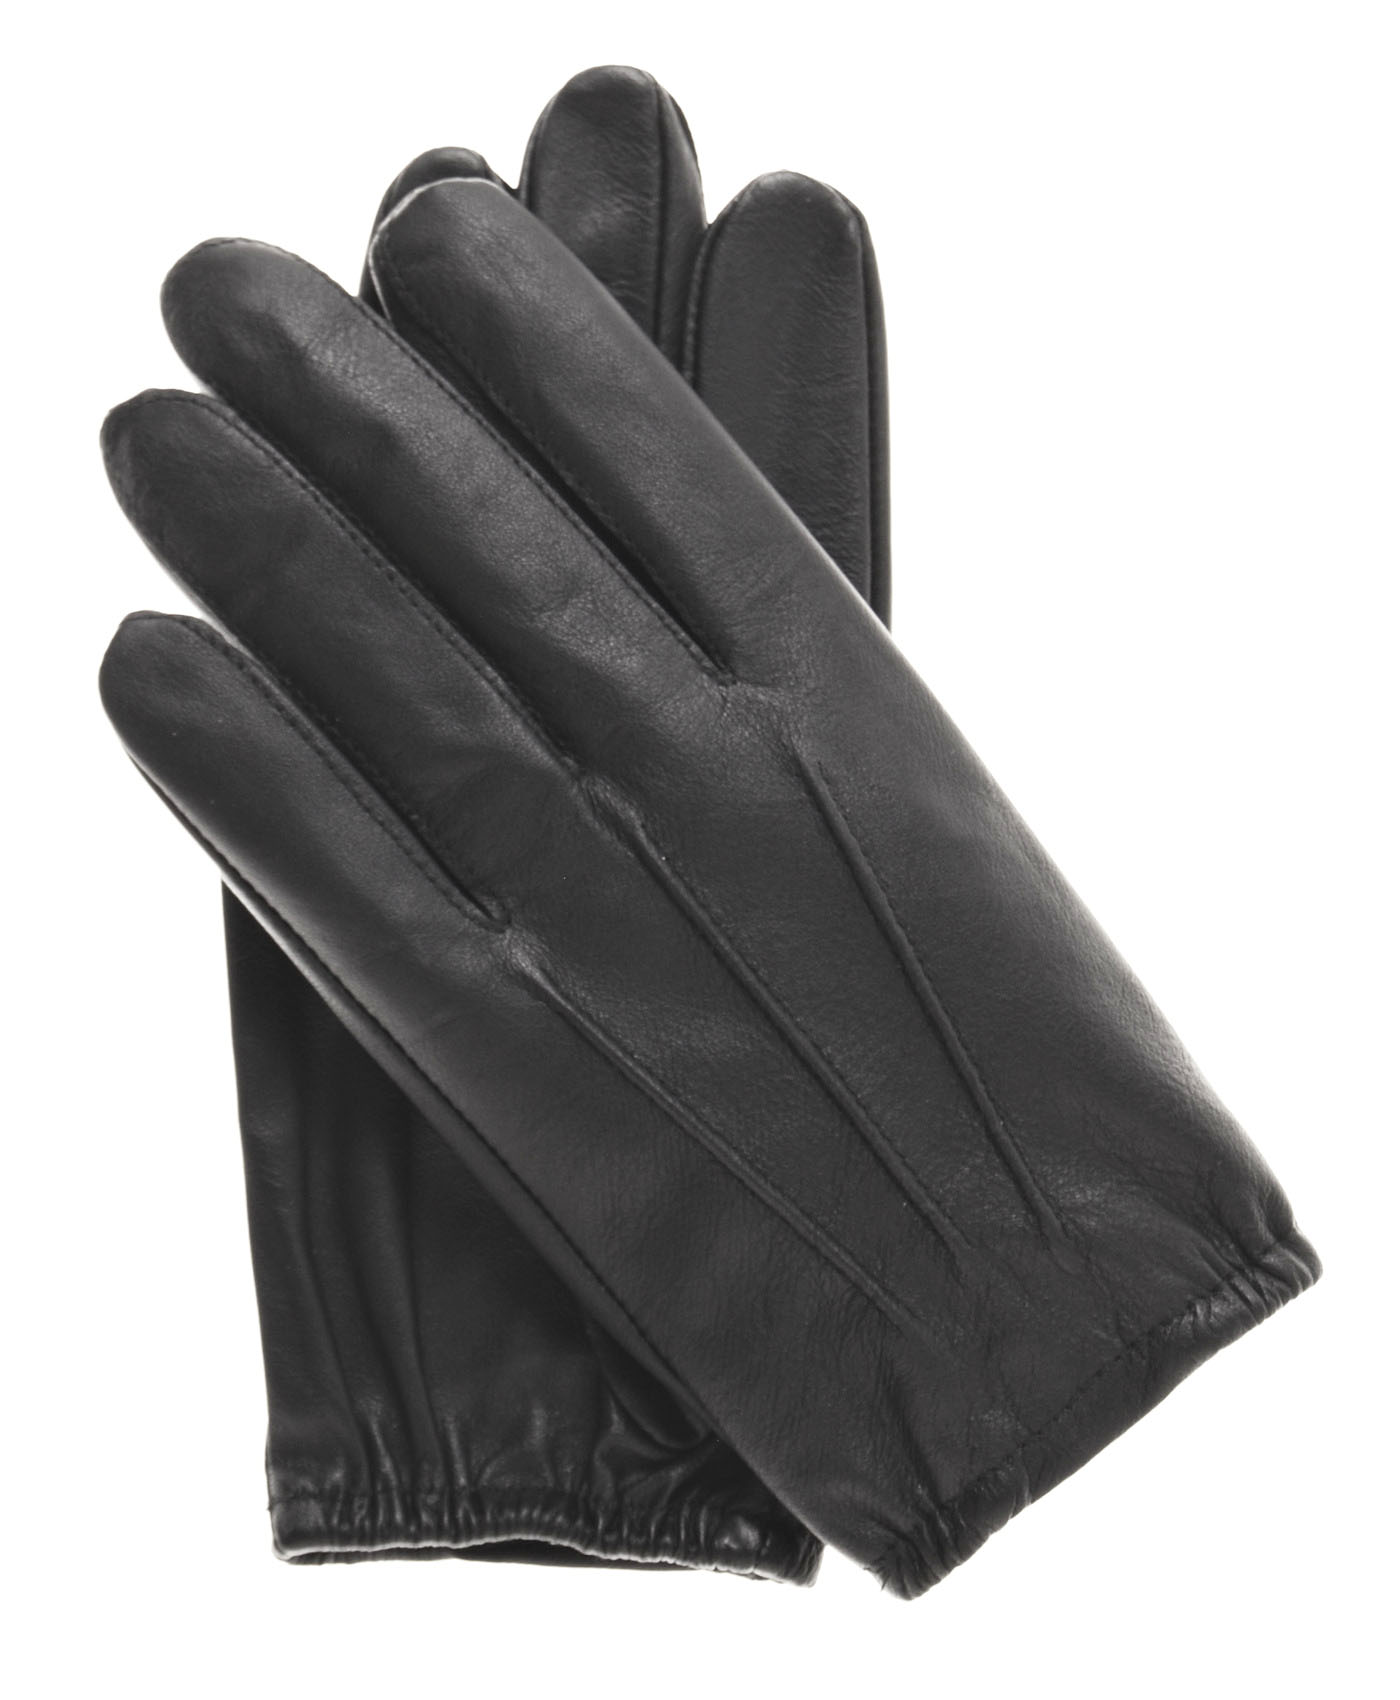 Men's All-purpose Winter Gloves with SmartTek Lining By Pratt and ...